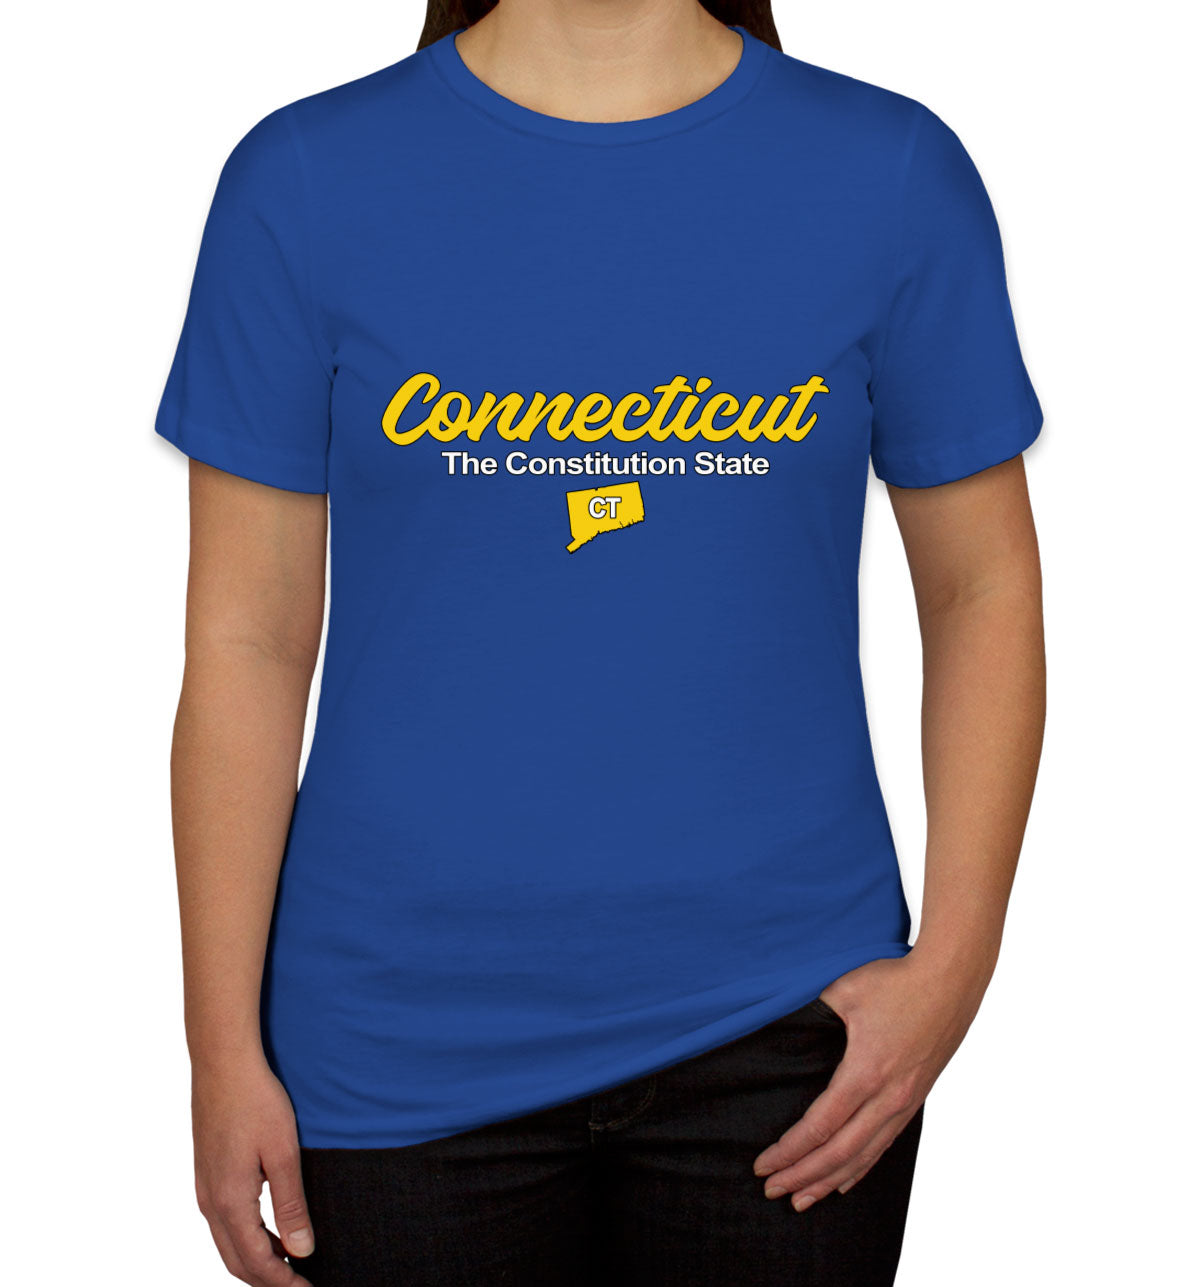 Connecticut The Constitution State Women's T-shirt